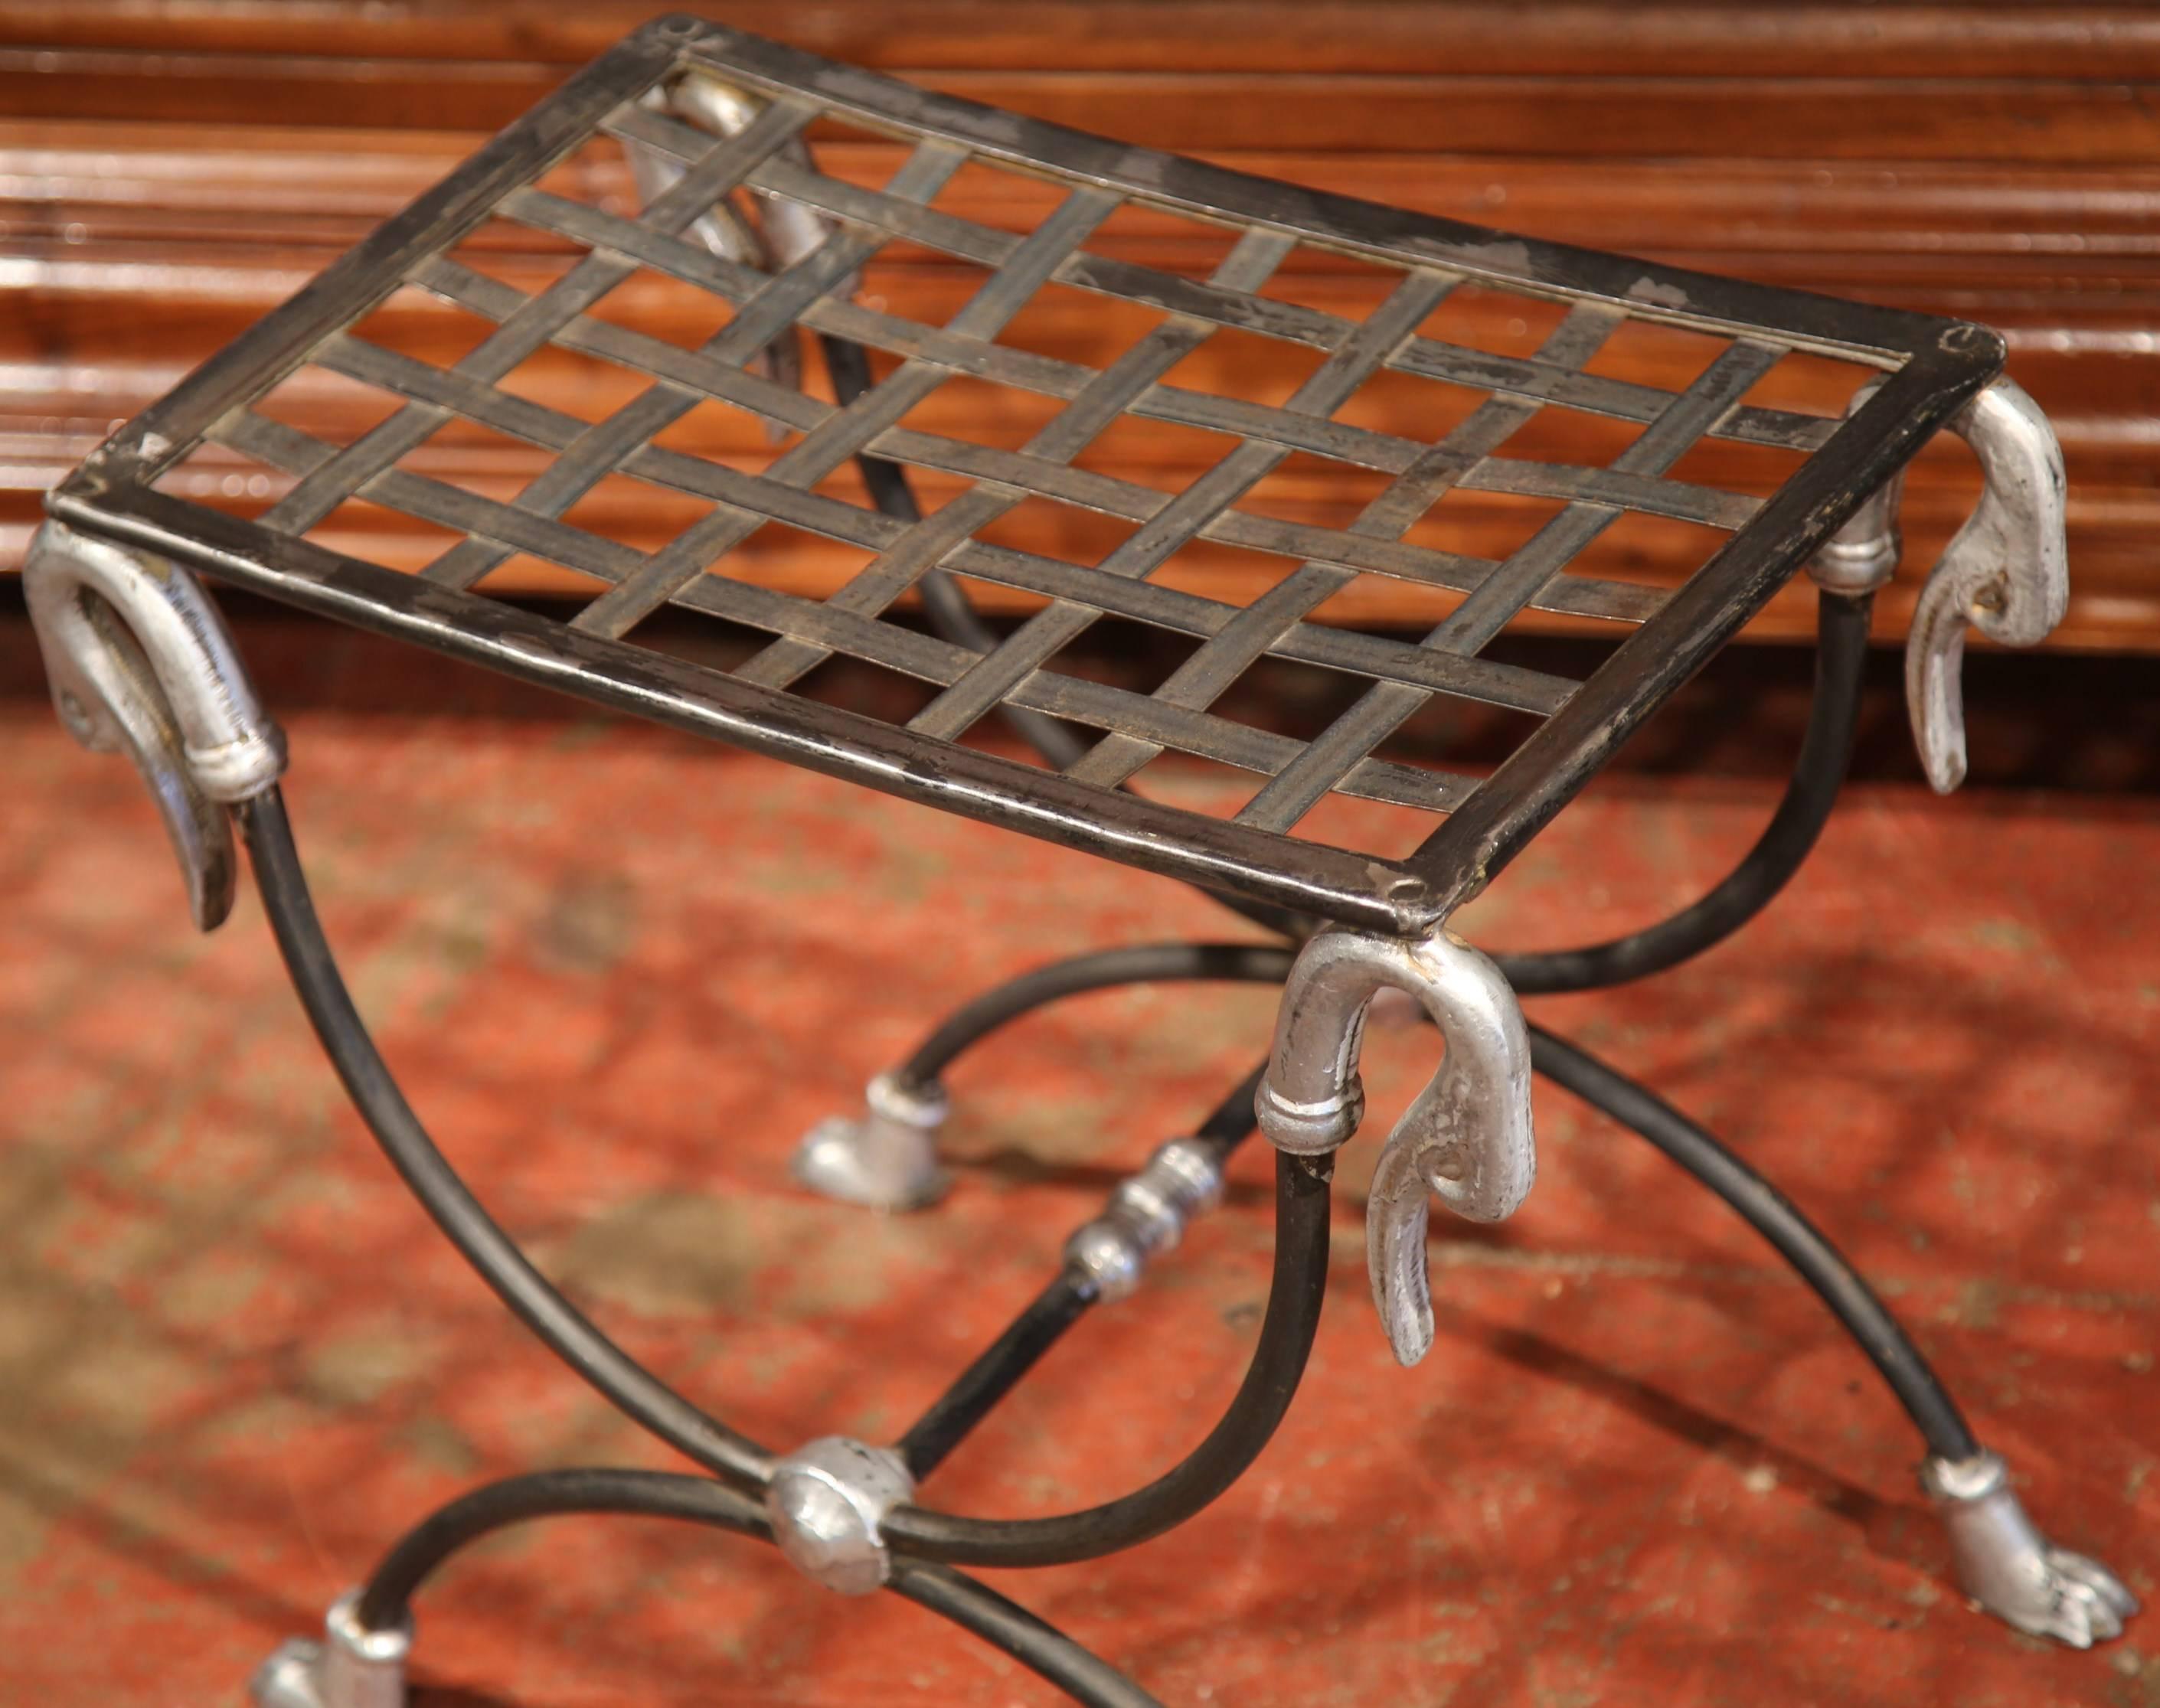 Add elegance to your bathroom with this interesting iron forged vanity stool from France, circa 1920. Created in the Dagobert style, the stool has a geometric weave design seat, which is held up in the corners by four swan faces and paw feet at the